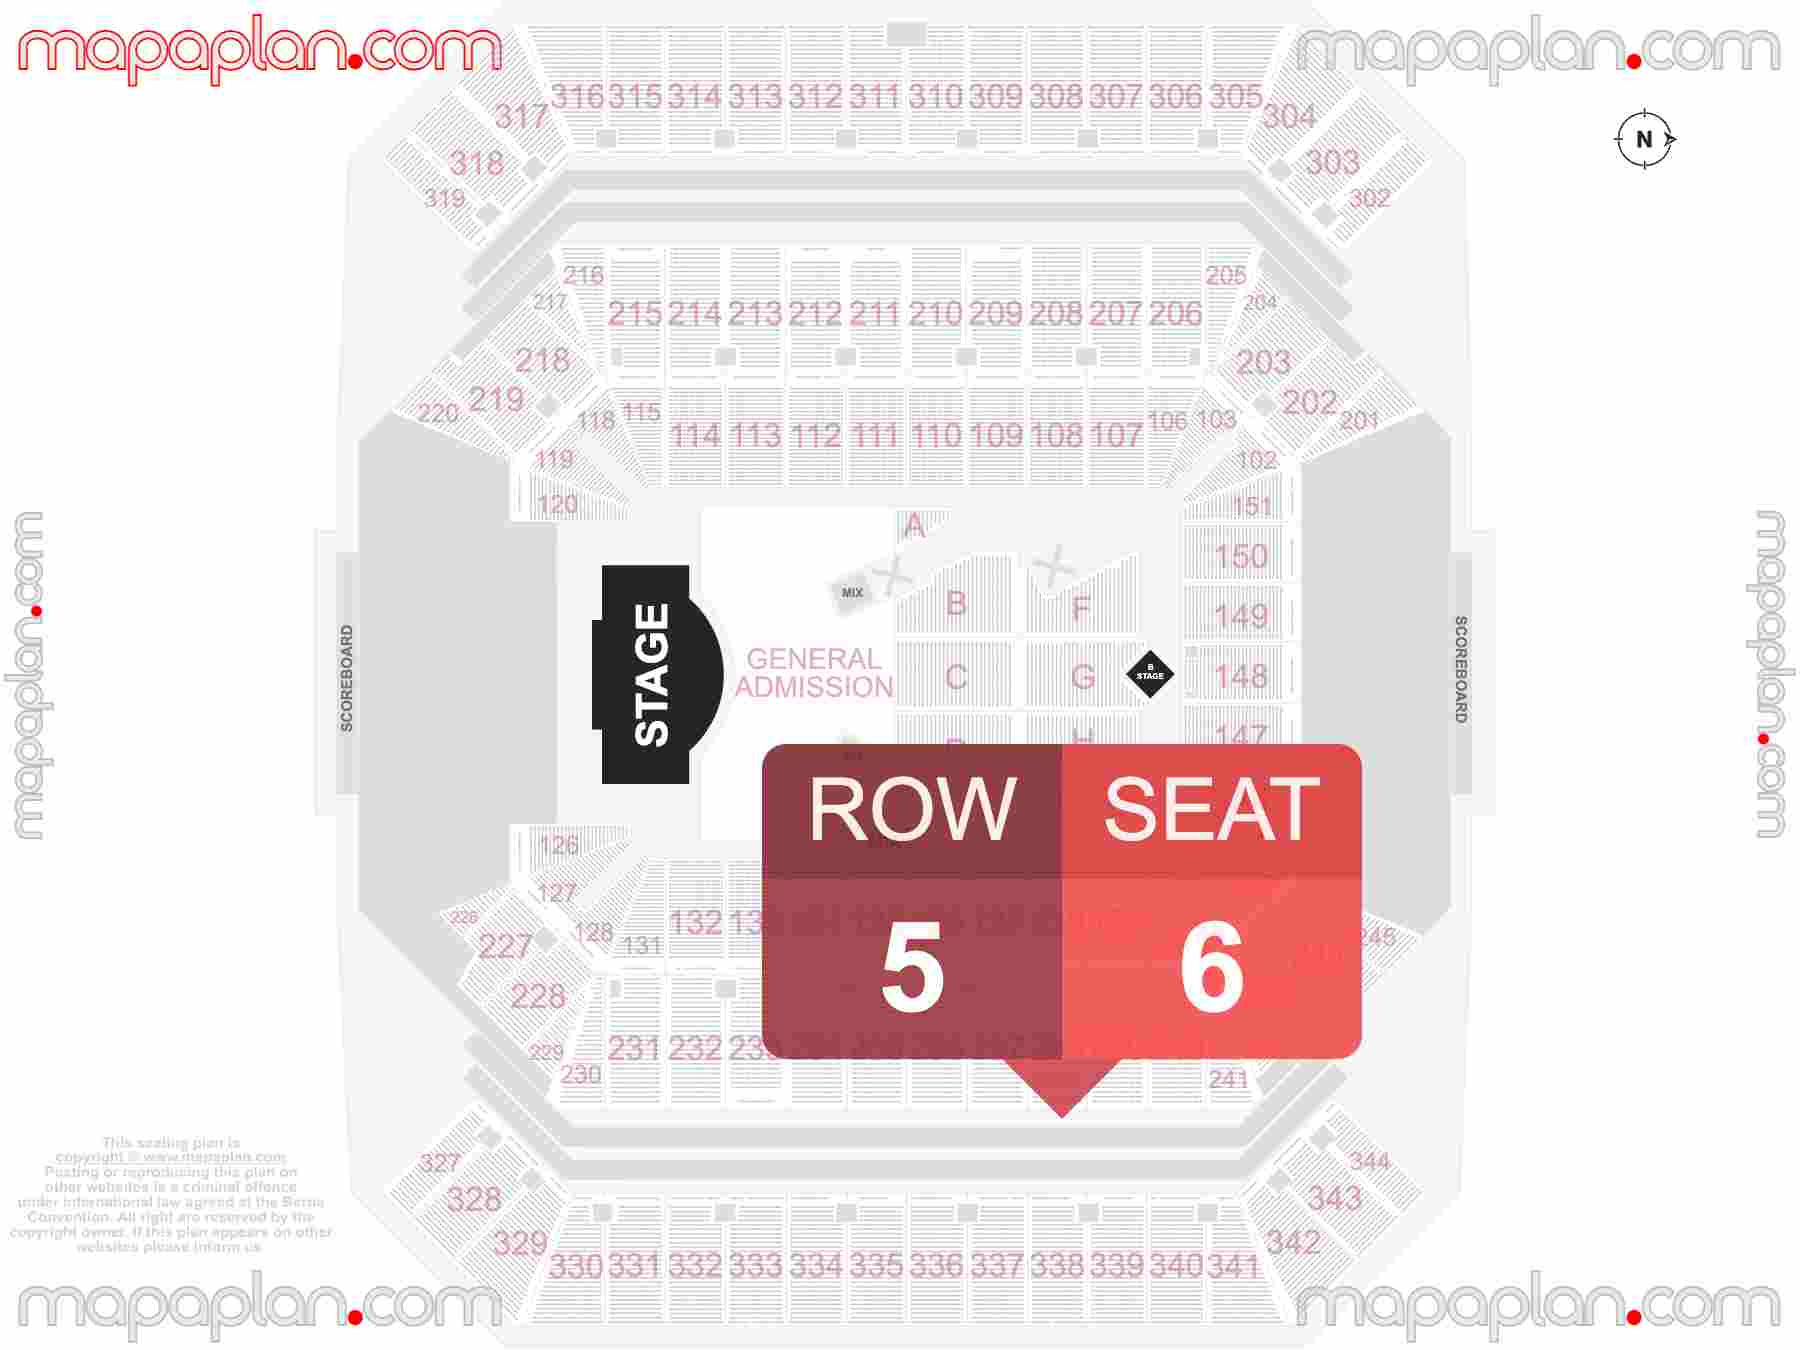 Tampa Raymond James Stadium seating chart Concert with floor general admission standing find best seats row numbering system plan showing how many seats per row - Individual 'find my seat' virtual locator